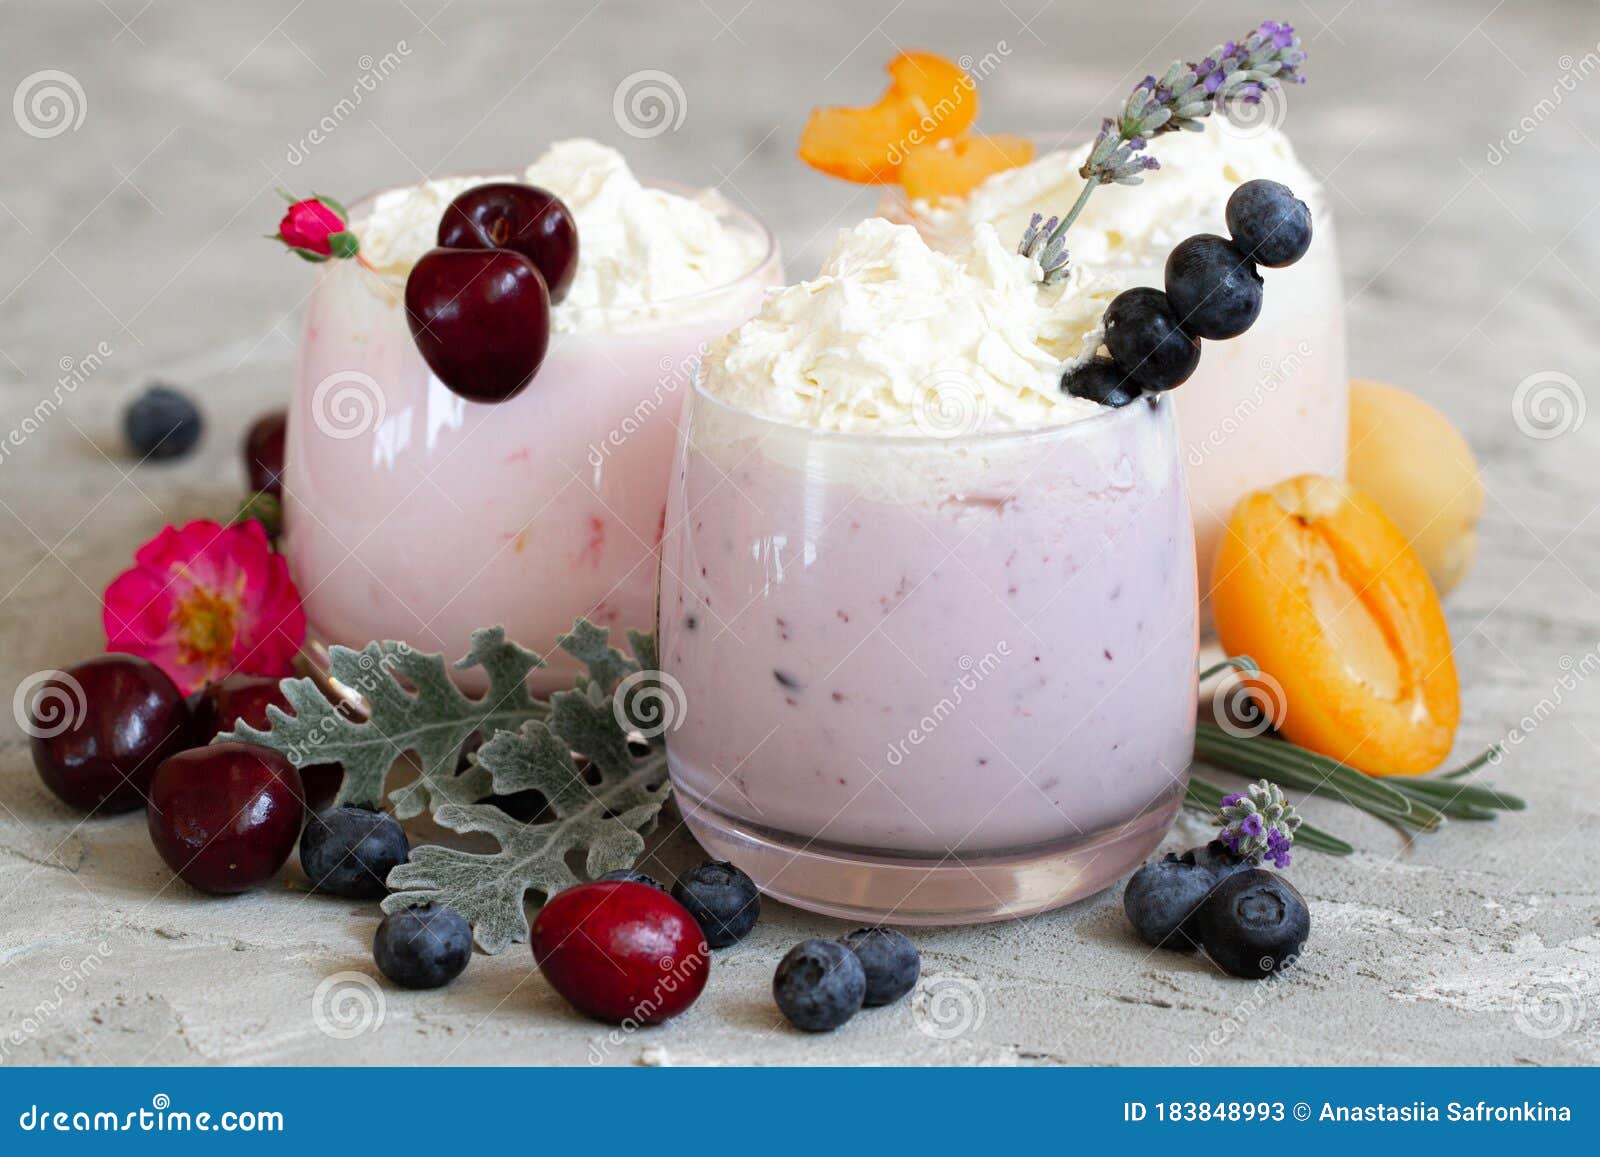 cherry, blueberry, apricot smoothie on light background. well being and weight loos concept. milkshake with fresh berries. healthy